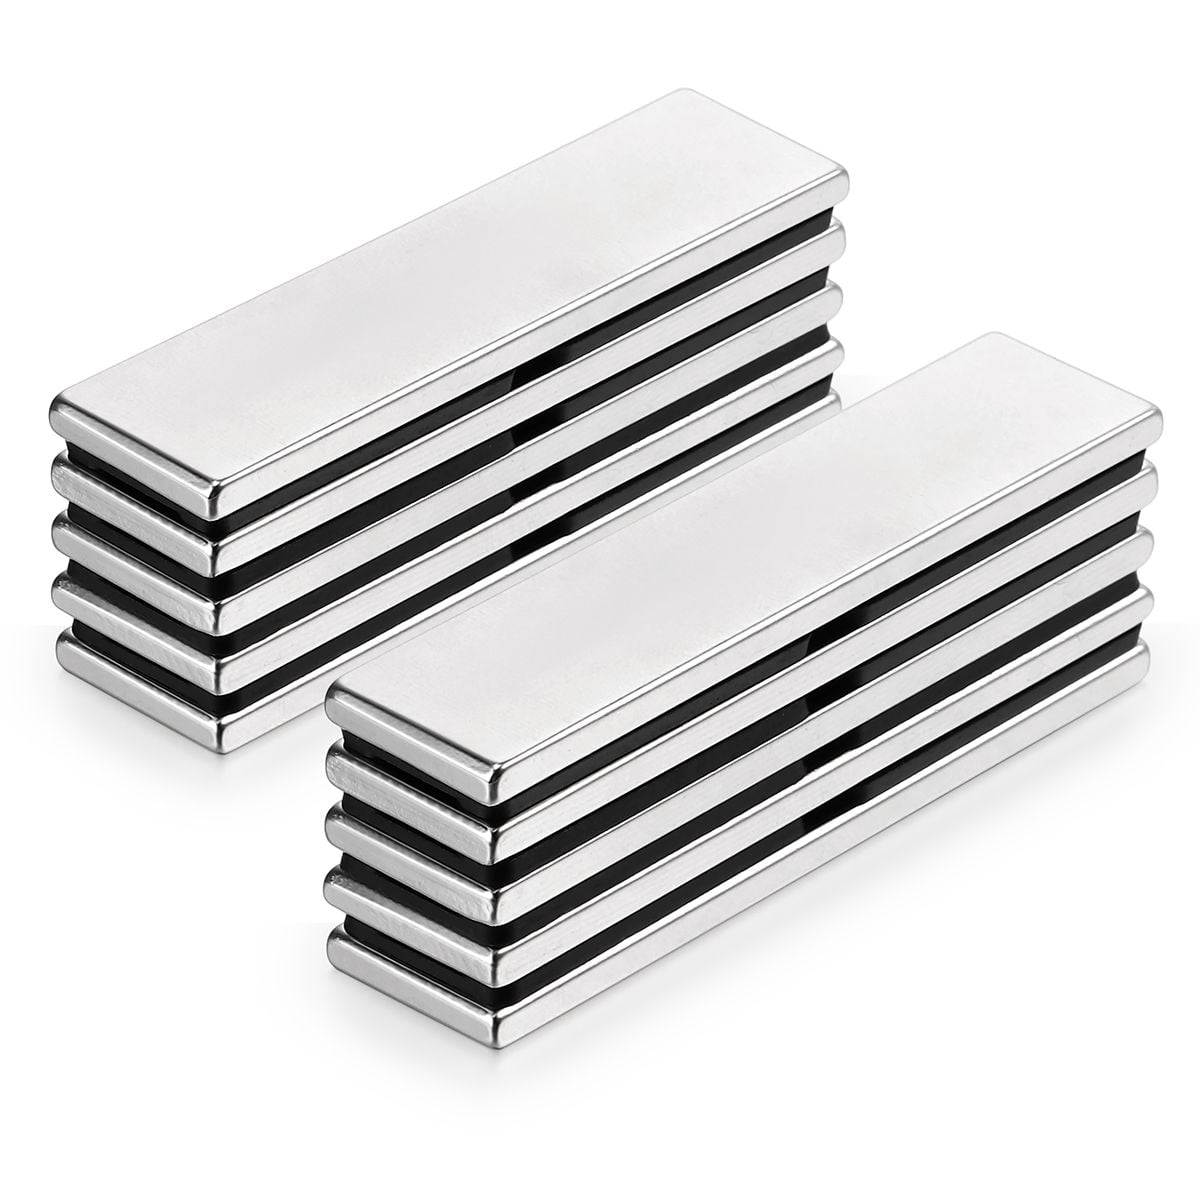 Pack of 1 60mm x 12mm x 5mm Extra Thick Strong Neo Neodymium Block Bar Magnet 